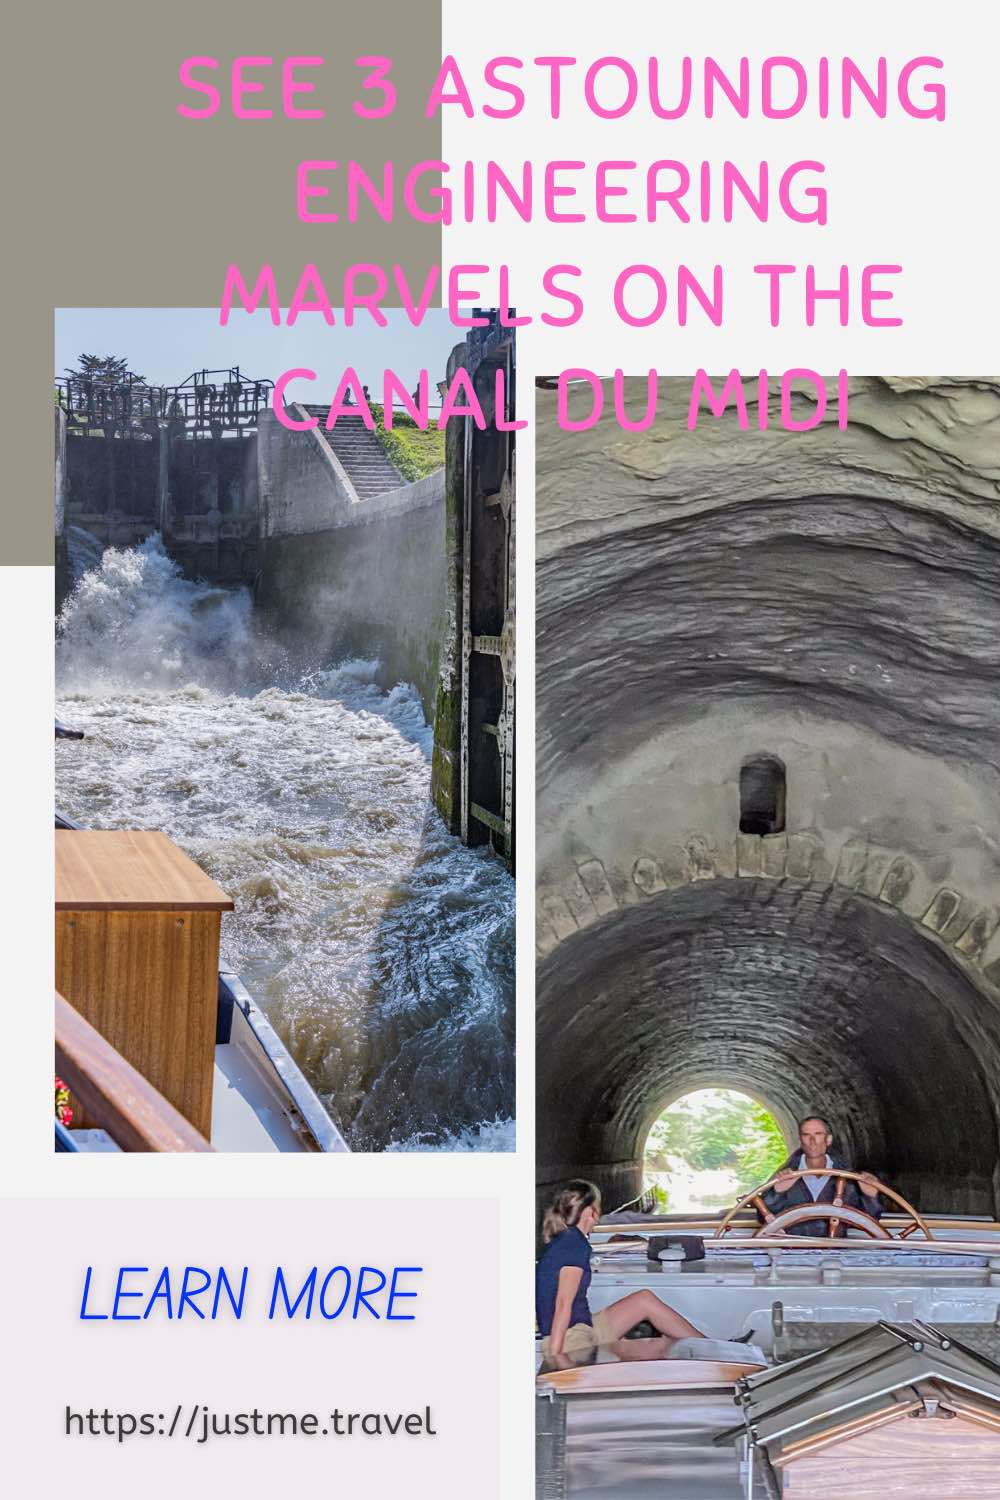 The image is two photos - a boat entering the swirling waters of a lock chamber and the other is a boat, steered by a man, exiting a tunnel.